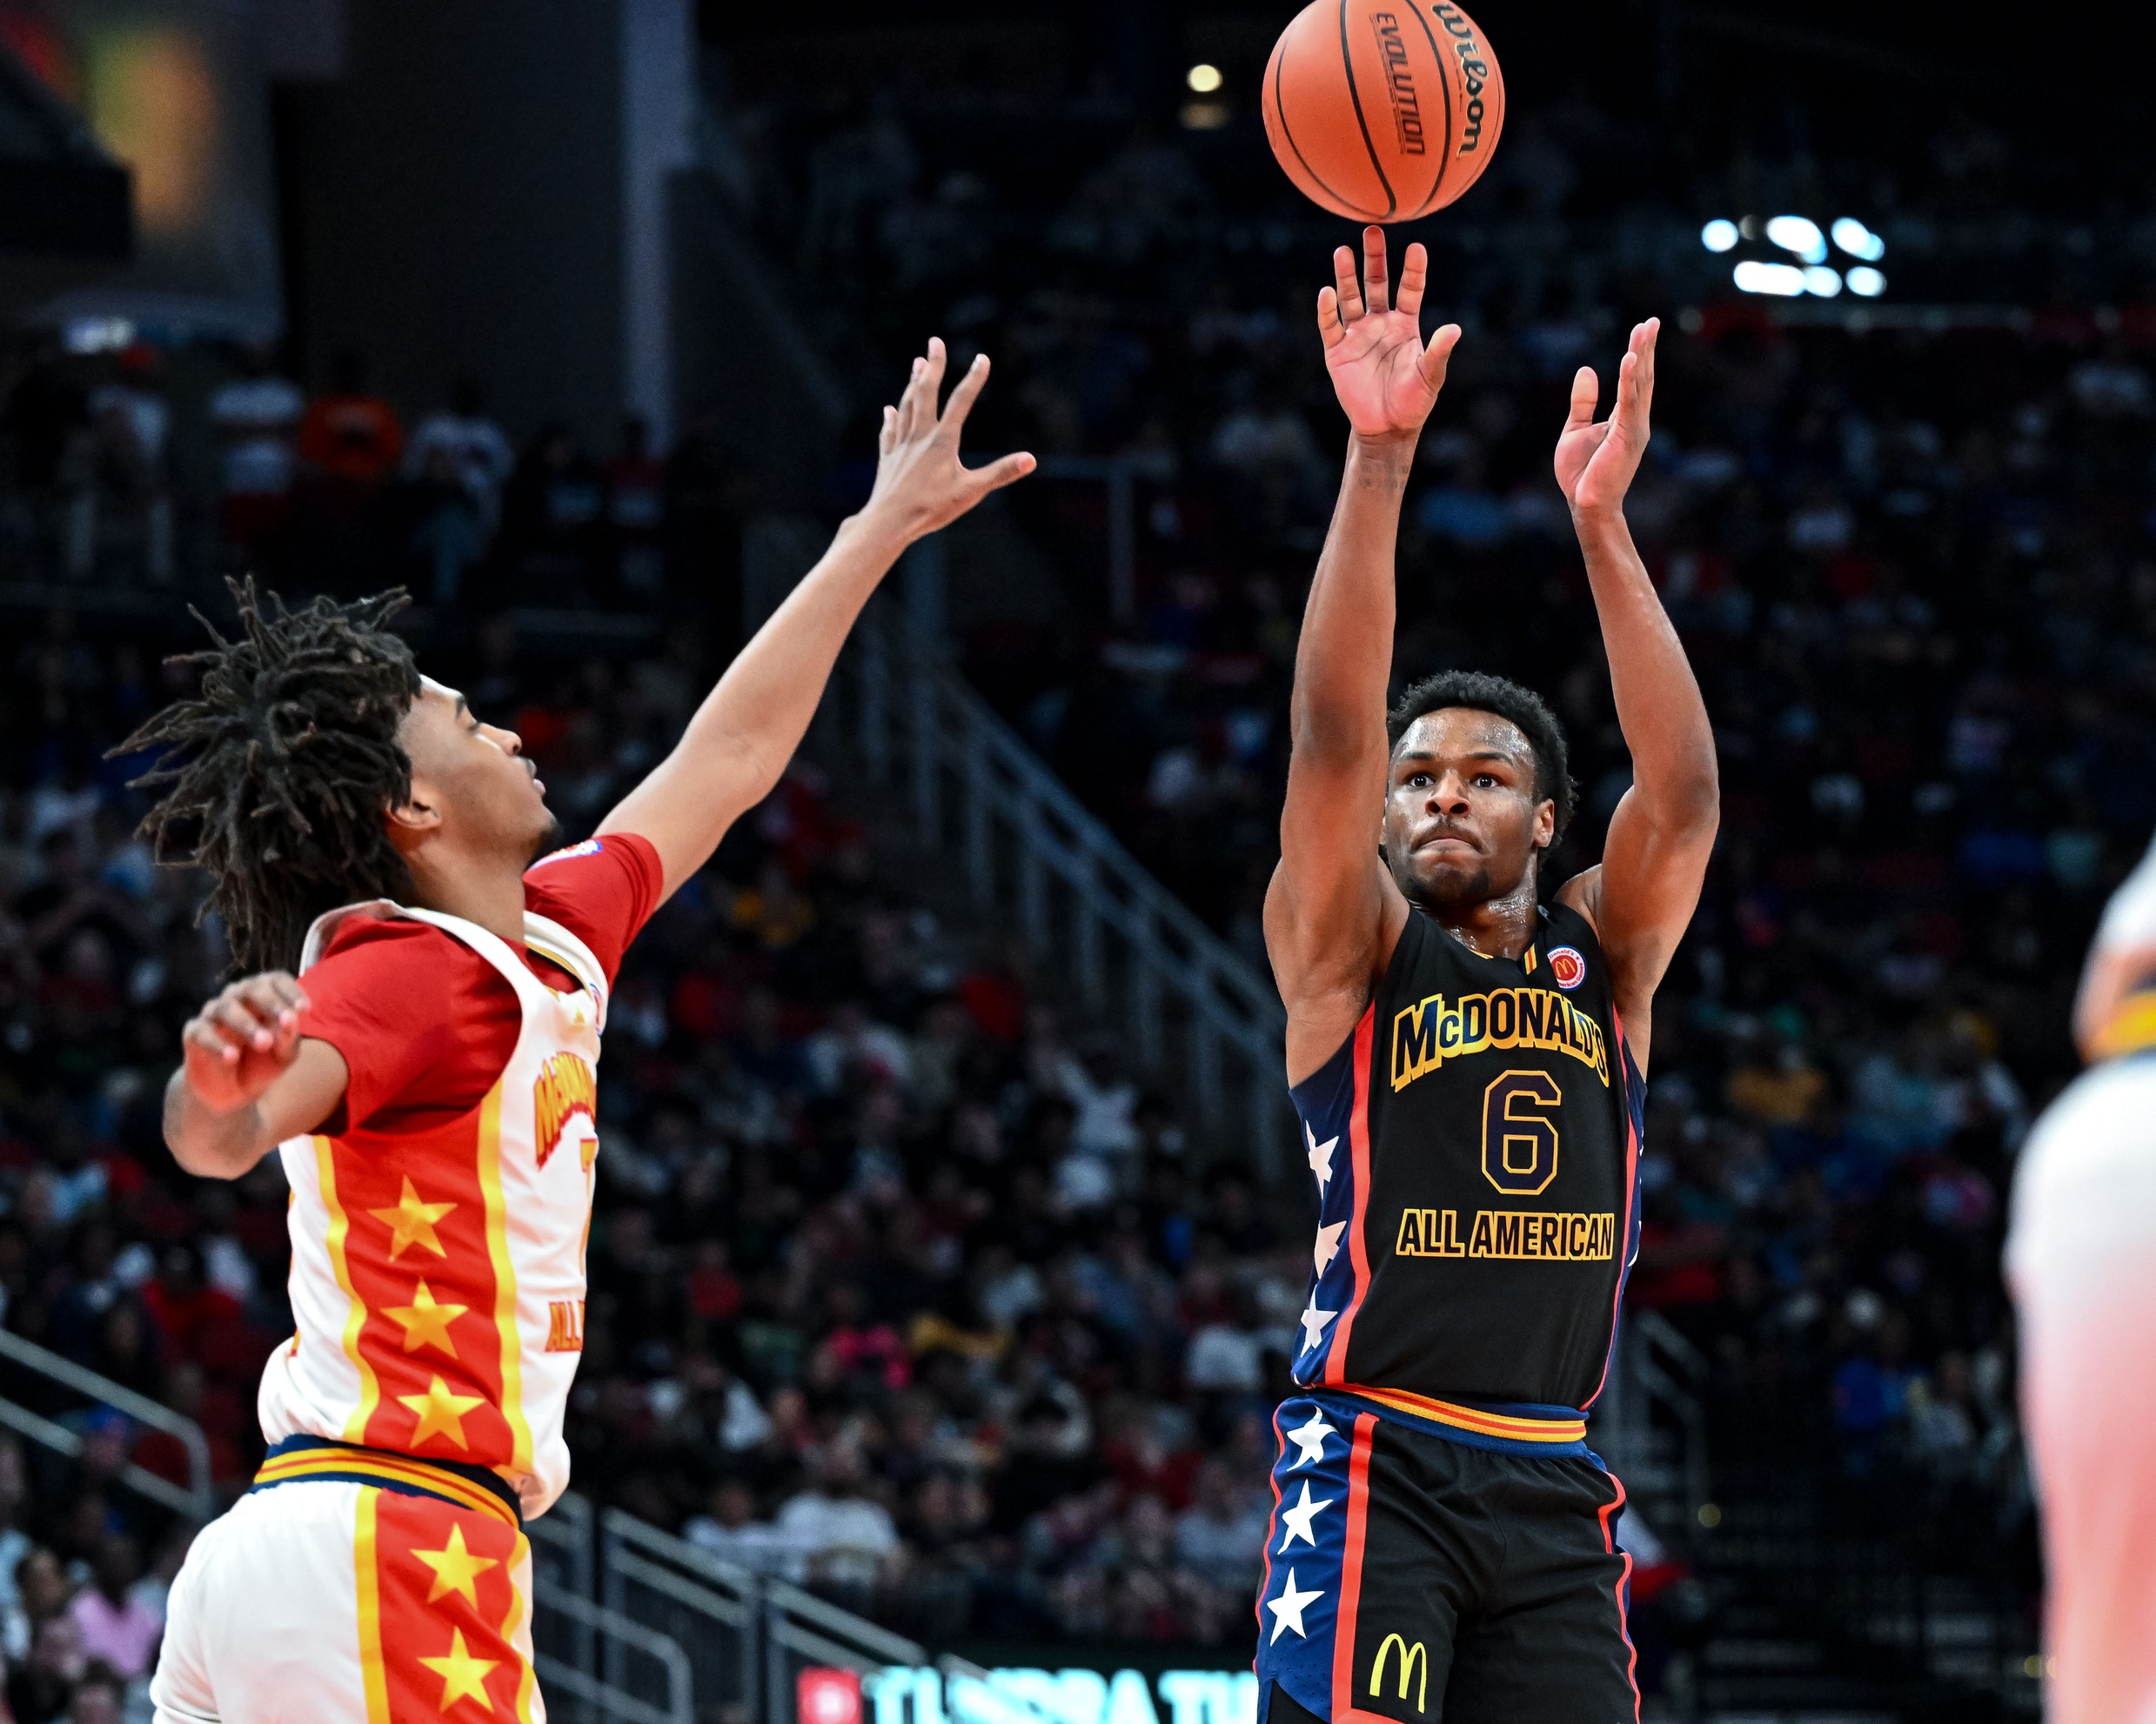 Mar 28, 2023; Houston, TX, USA; McDonald's All American West guard Bronny James (6) shoots the ball during the first half against the McDonald's All American East at Toyota Center. Mandatory Credit: Maria Lysaker-USA TODAY Sports